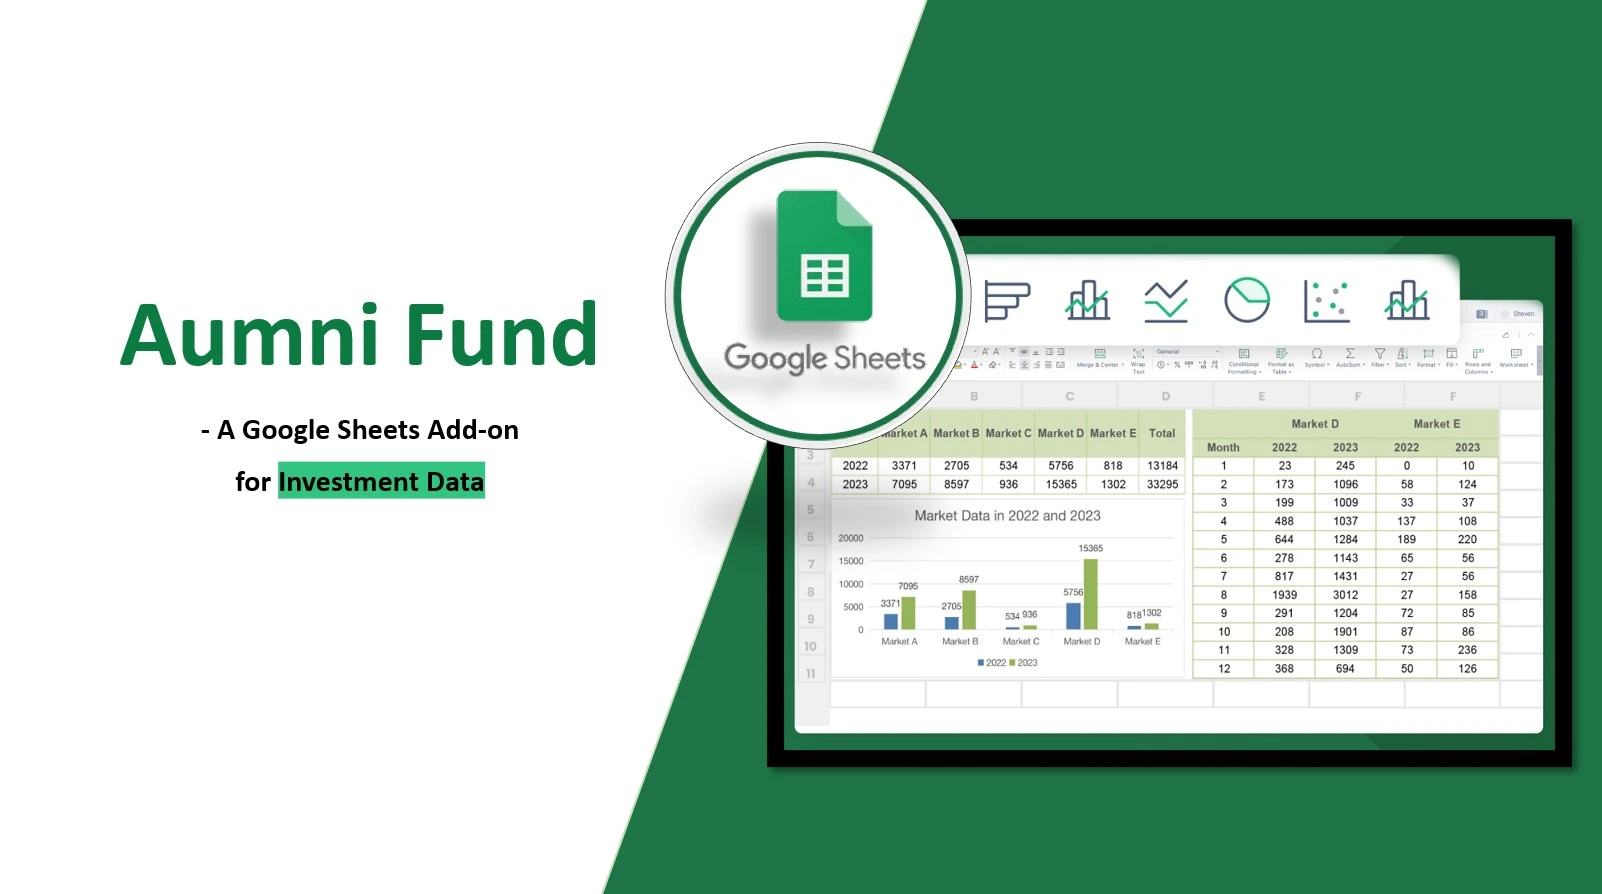  aumni-fund-a-google-sheets-addon-for-investment-data-icon